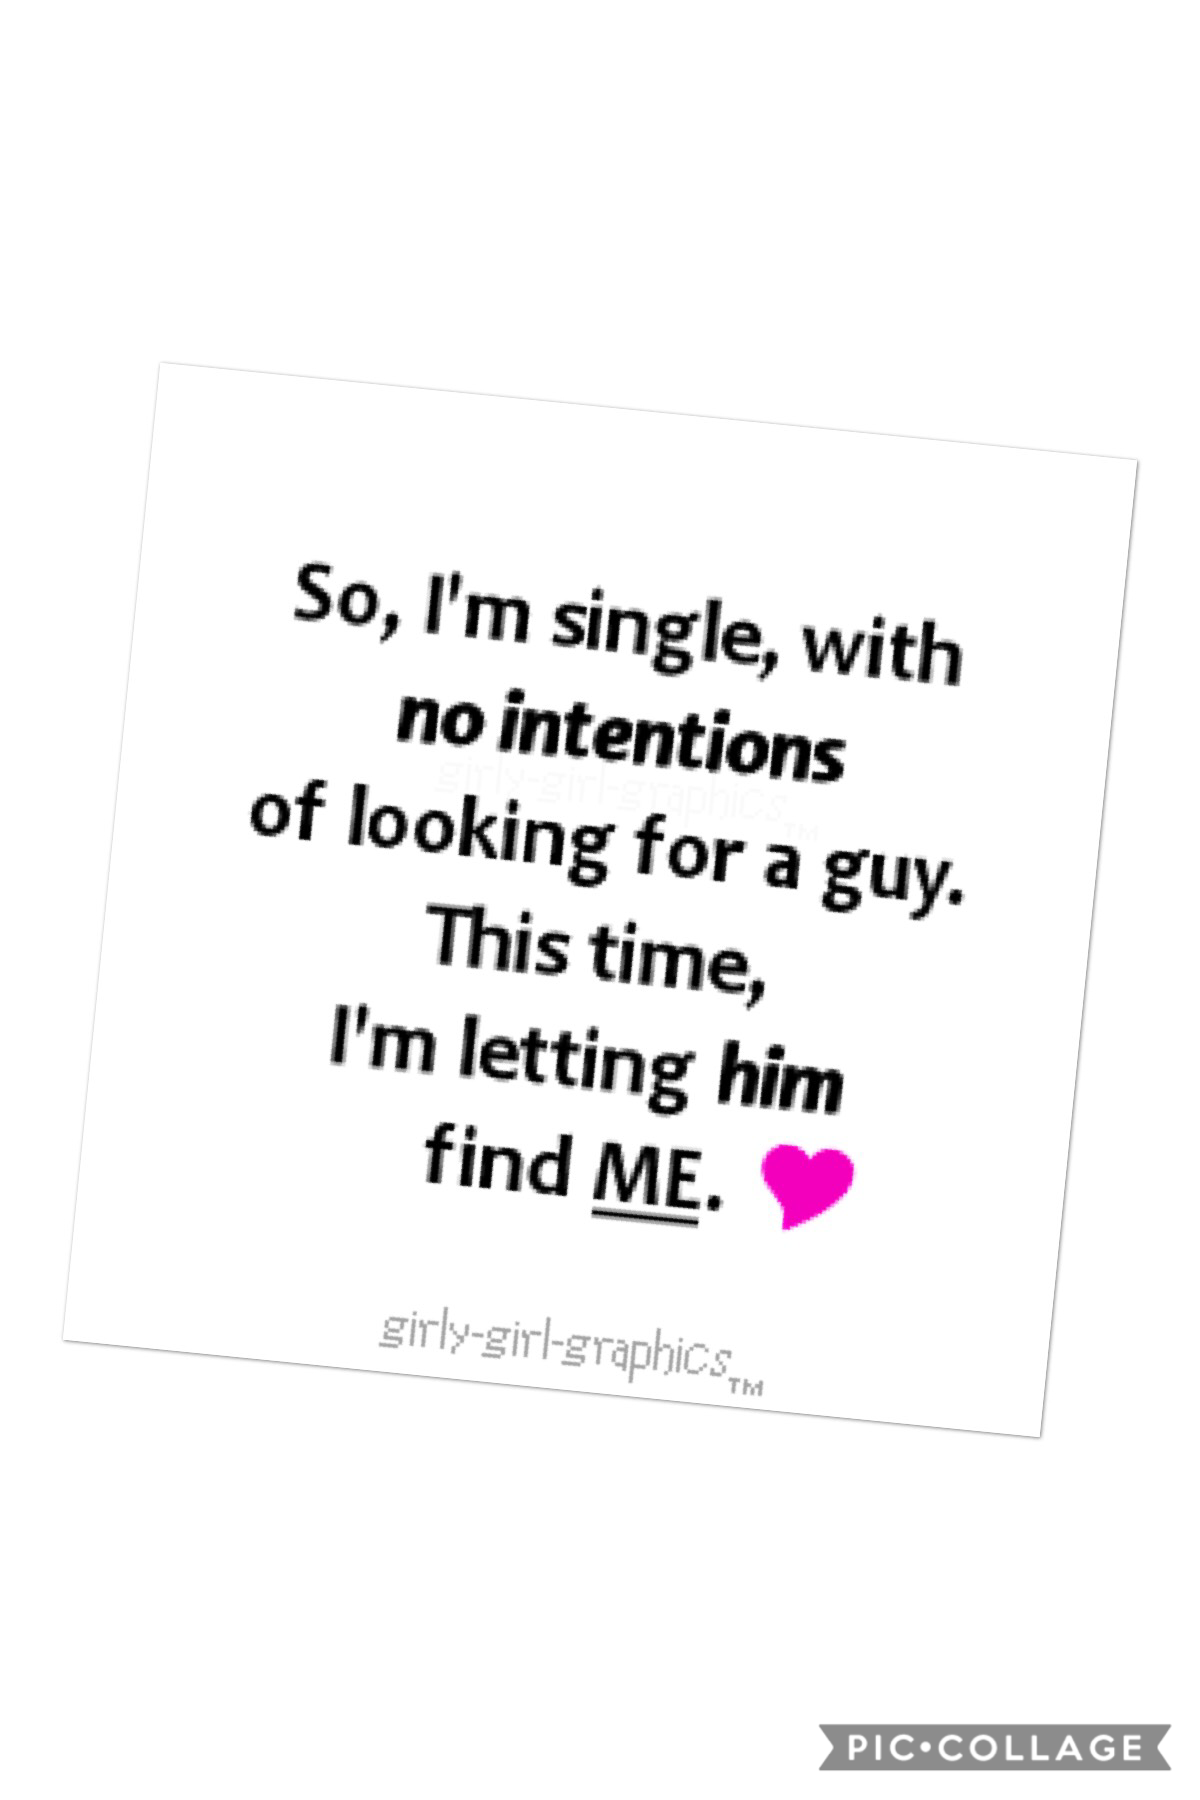 This is me I don’t want to be single but I have to